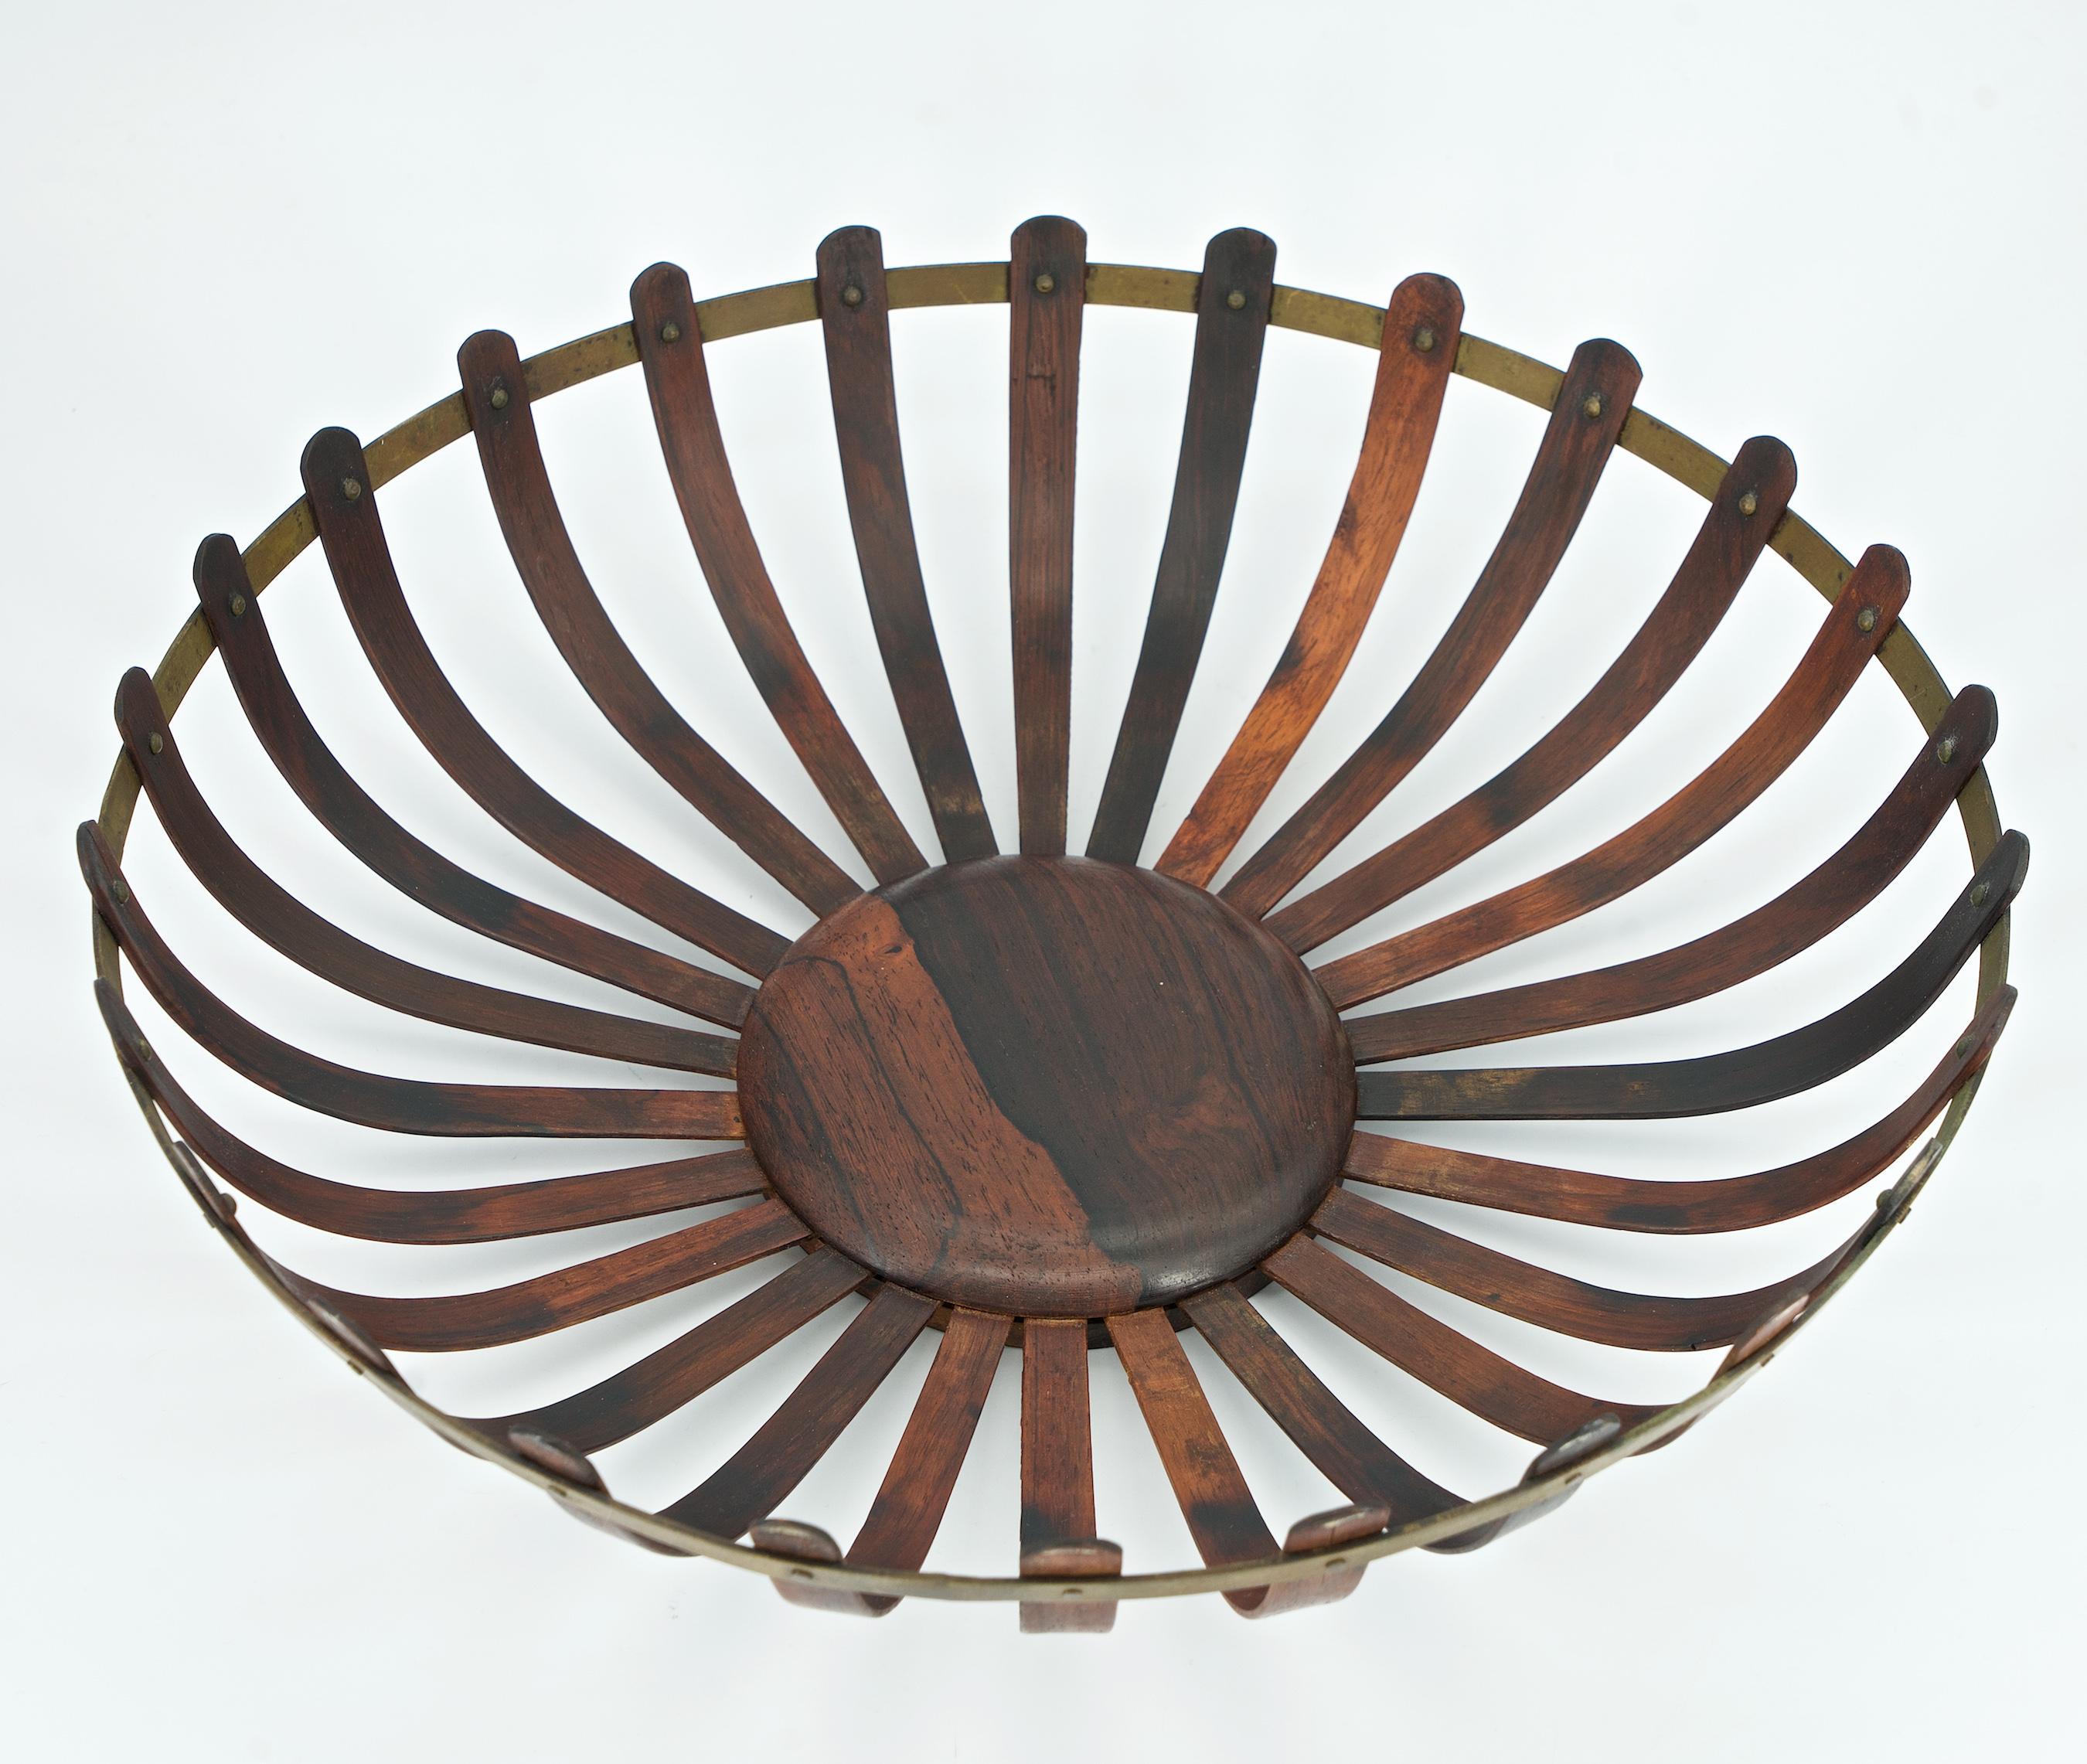 Made in Brazil, a hand-crafted footed centerpiece sculpture, truly an mid-century masterpiece. A fragile, brass belted, curved Jacaranda (Brazilian Rosewood) slat design. A rare find, cleaned and re-oiled. In the manner of Oscar Niemeyer or Joaquim